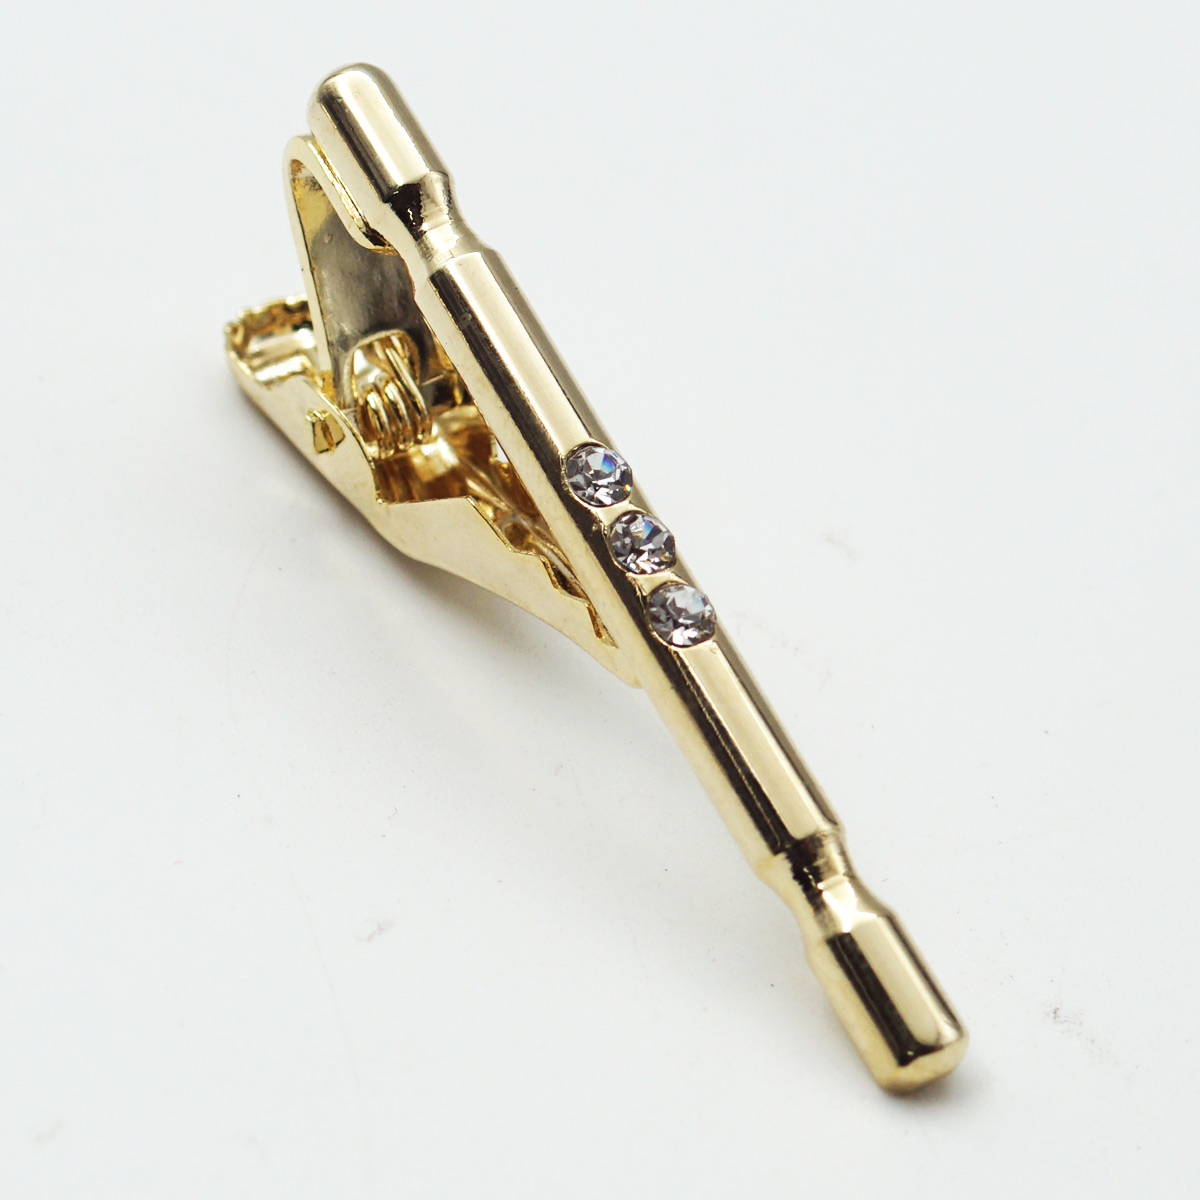 penhouse.in Slim Gold Color With Stone Metal Tie Pin SKU 87318